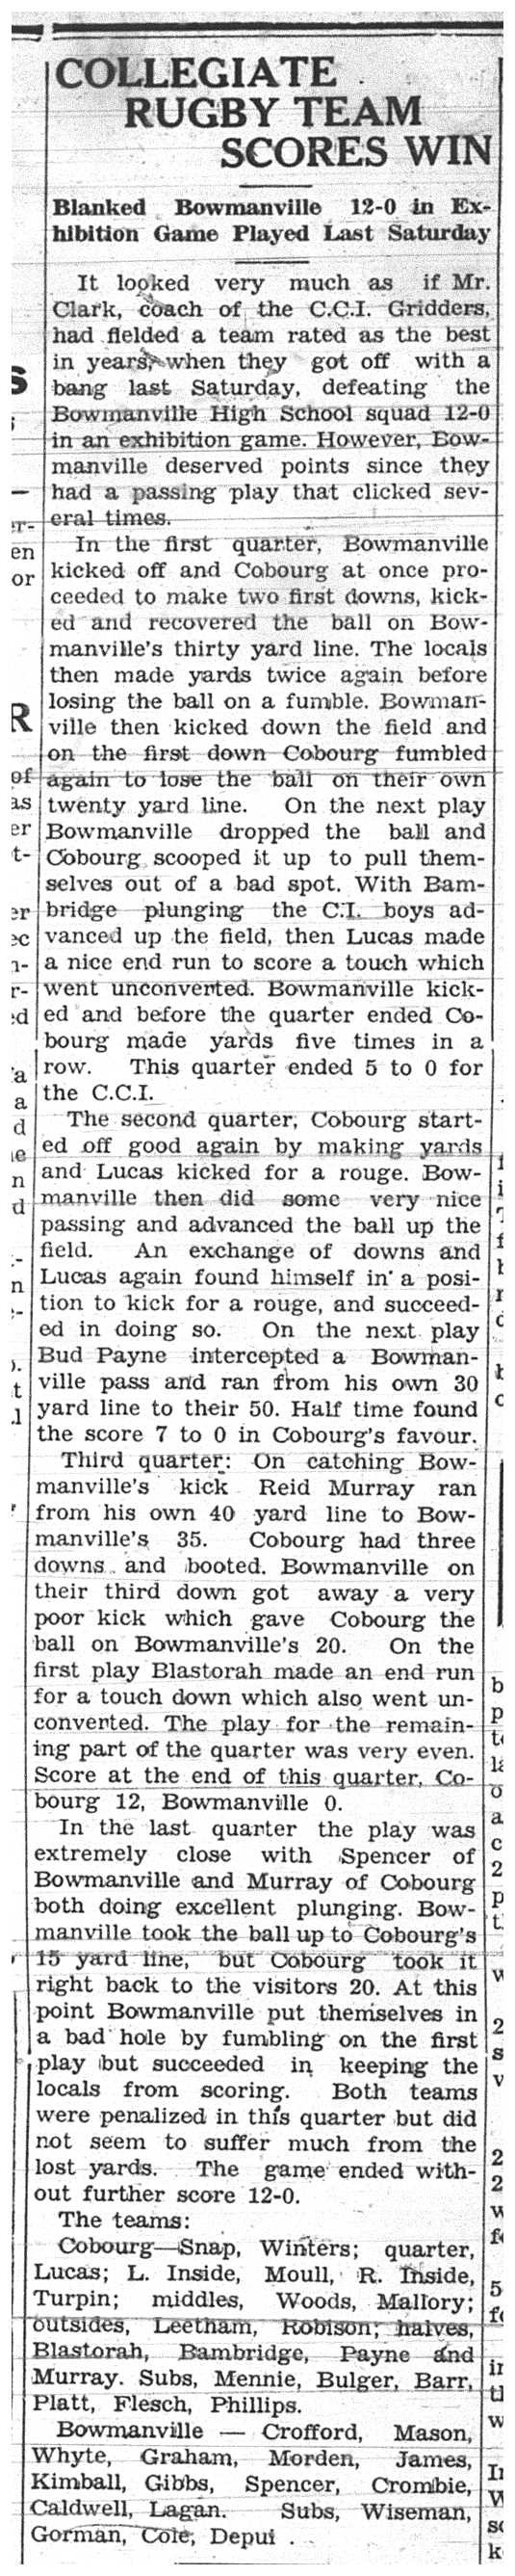 1937-10-07 School -CCI Rugby vs Bowmanville